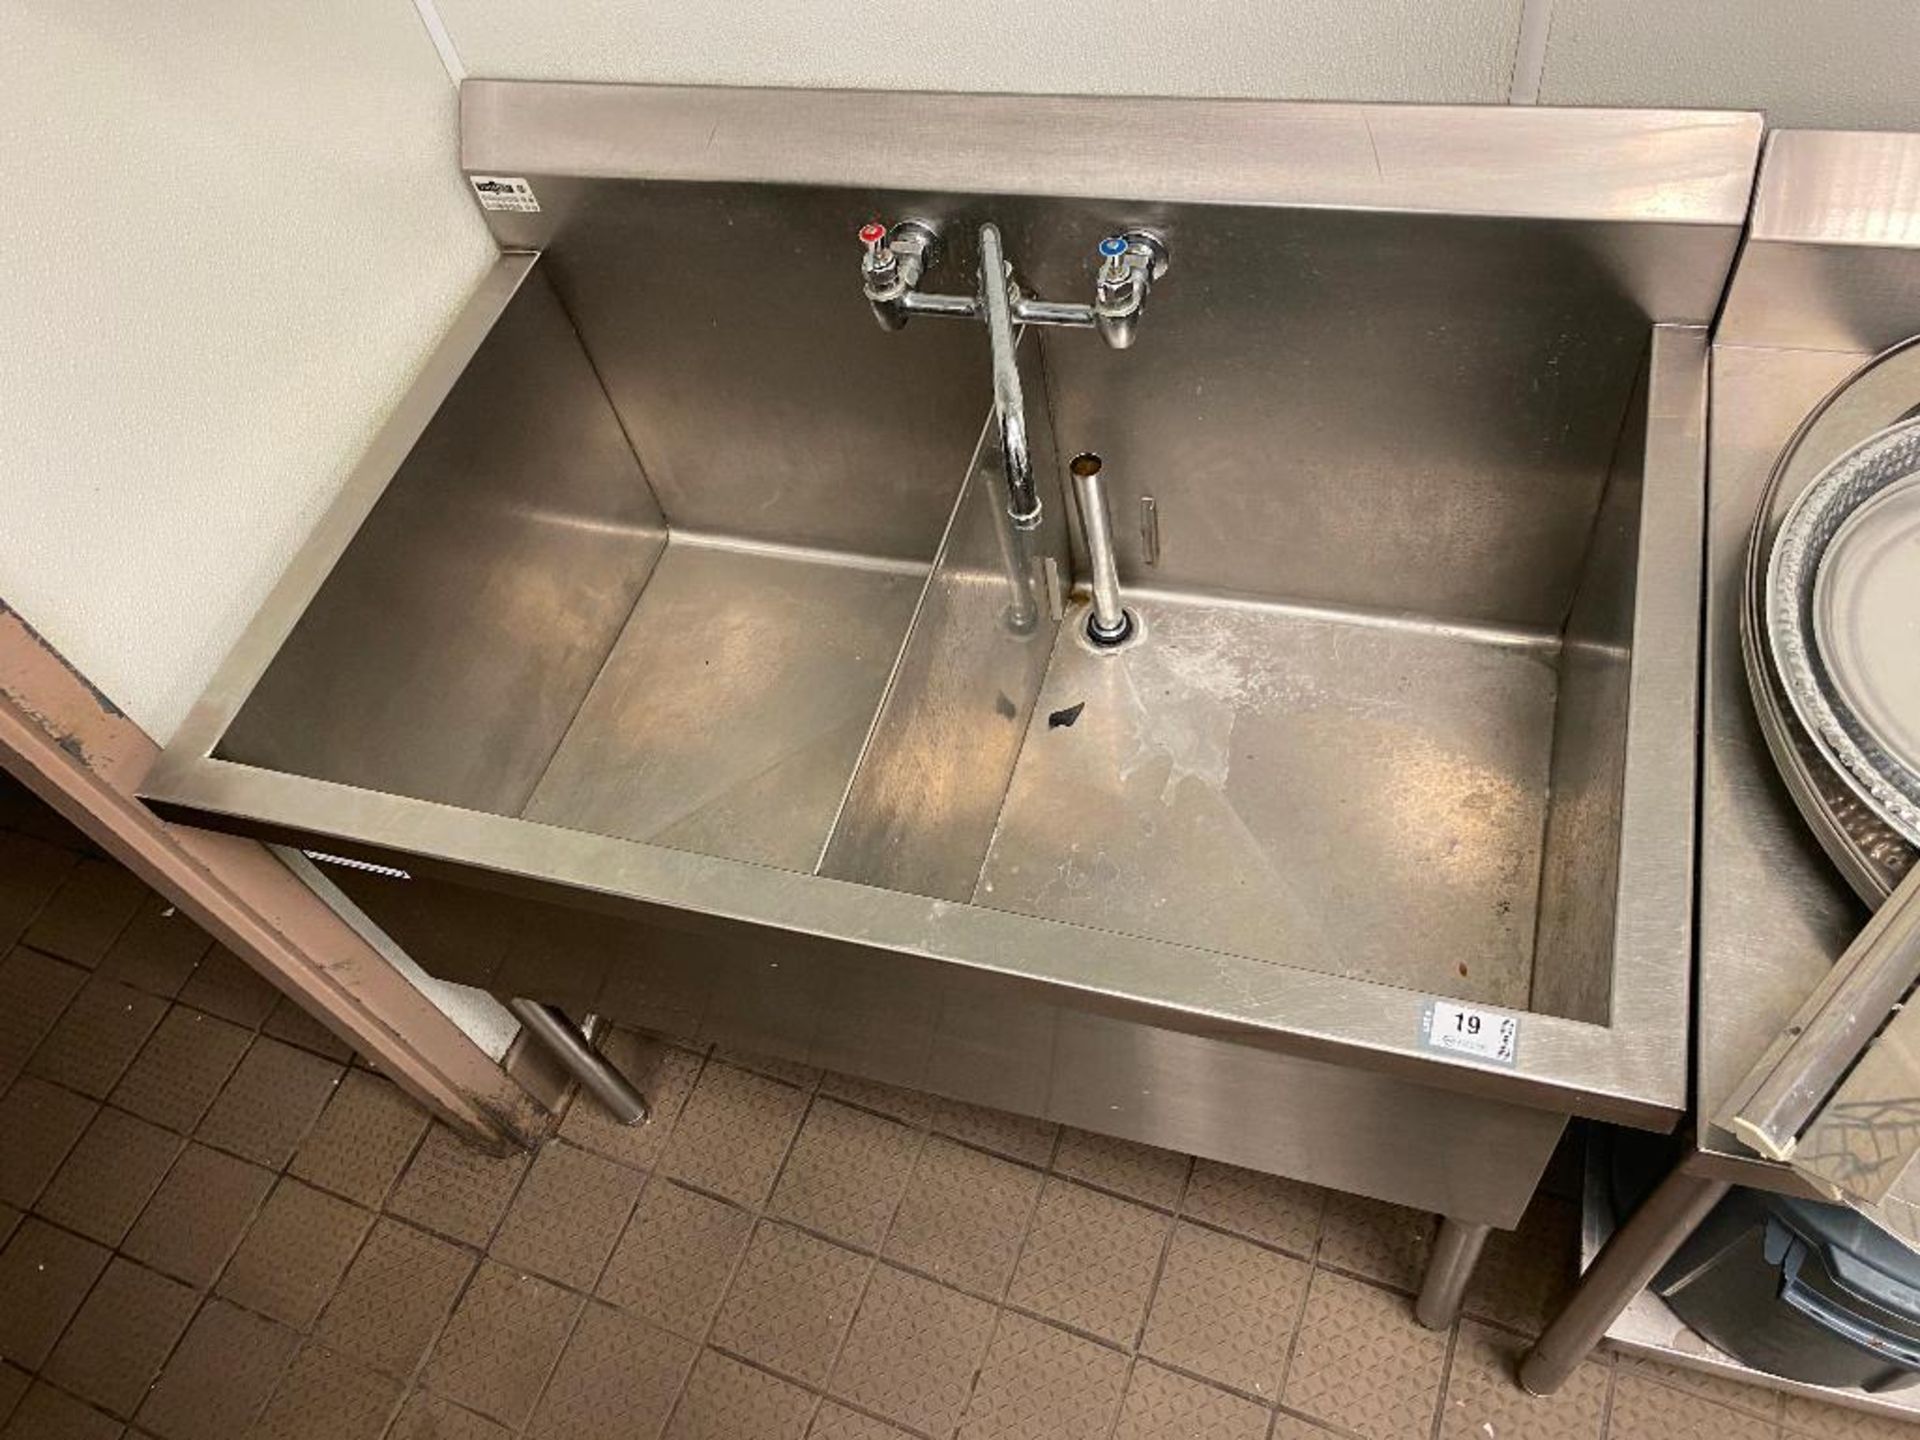 TRIMEN 2 WELL STAINLESS STEEL SINK - NOTE: REQUIRES DISCONNECT, PLEASE INSPECT - Image 3 of 3